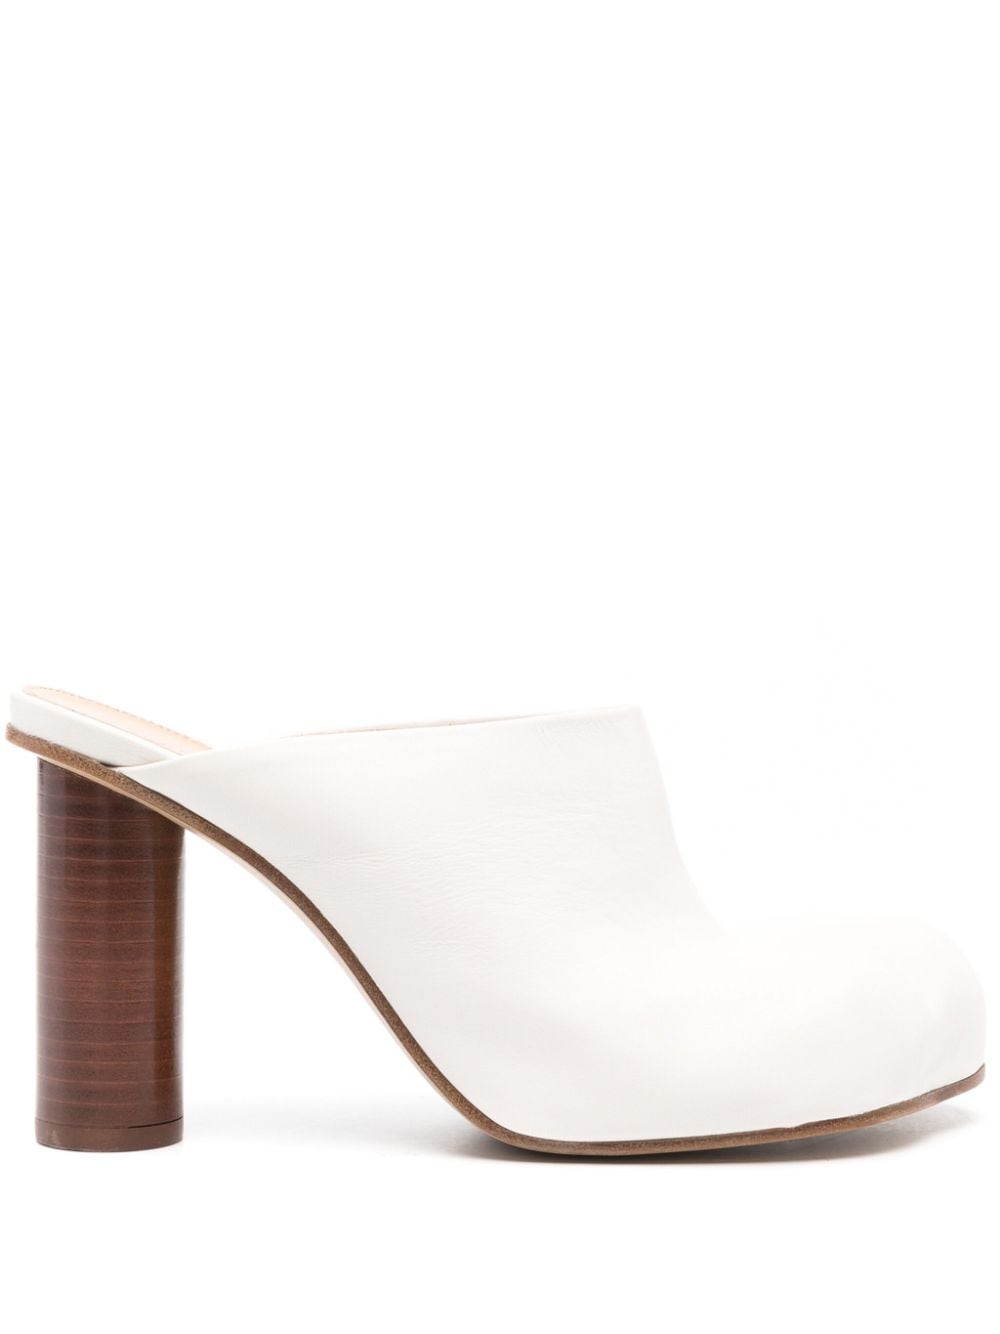 JW Anderson 95mm leather mules - White